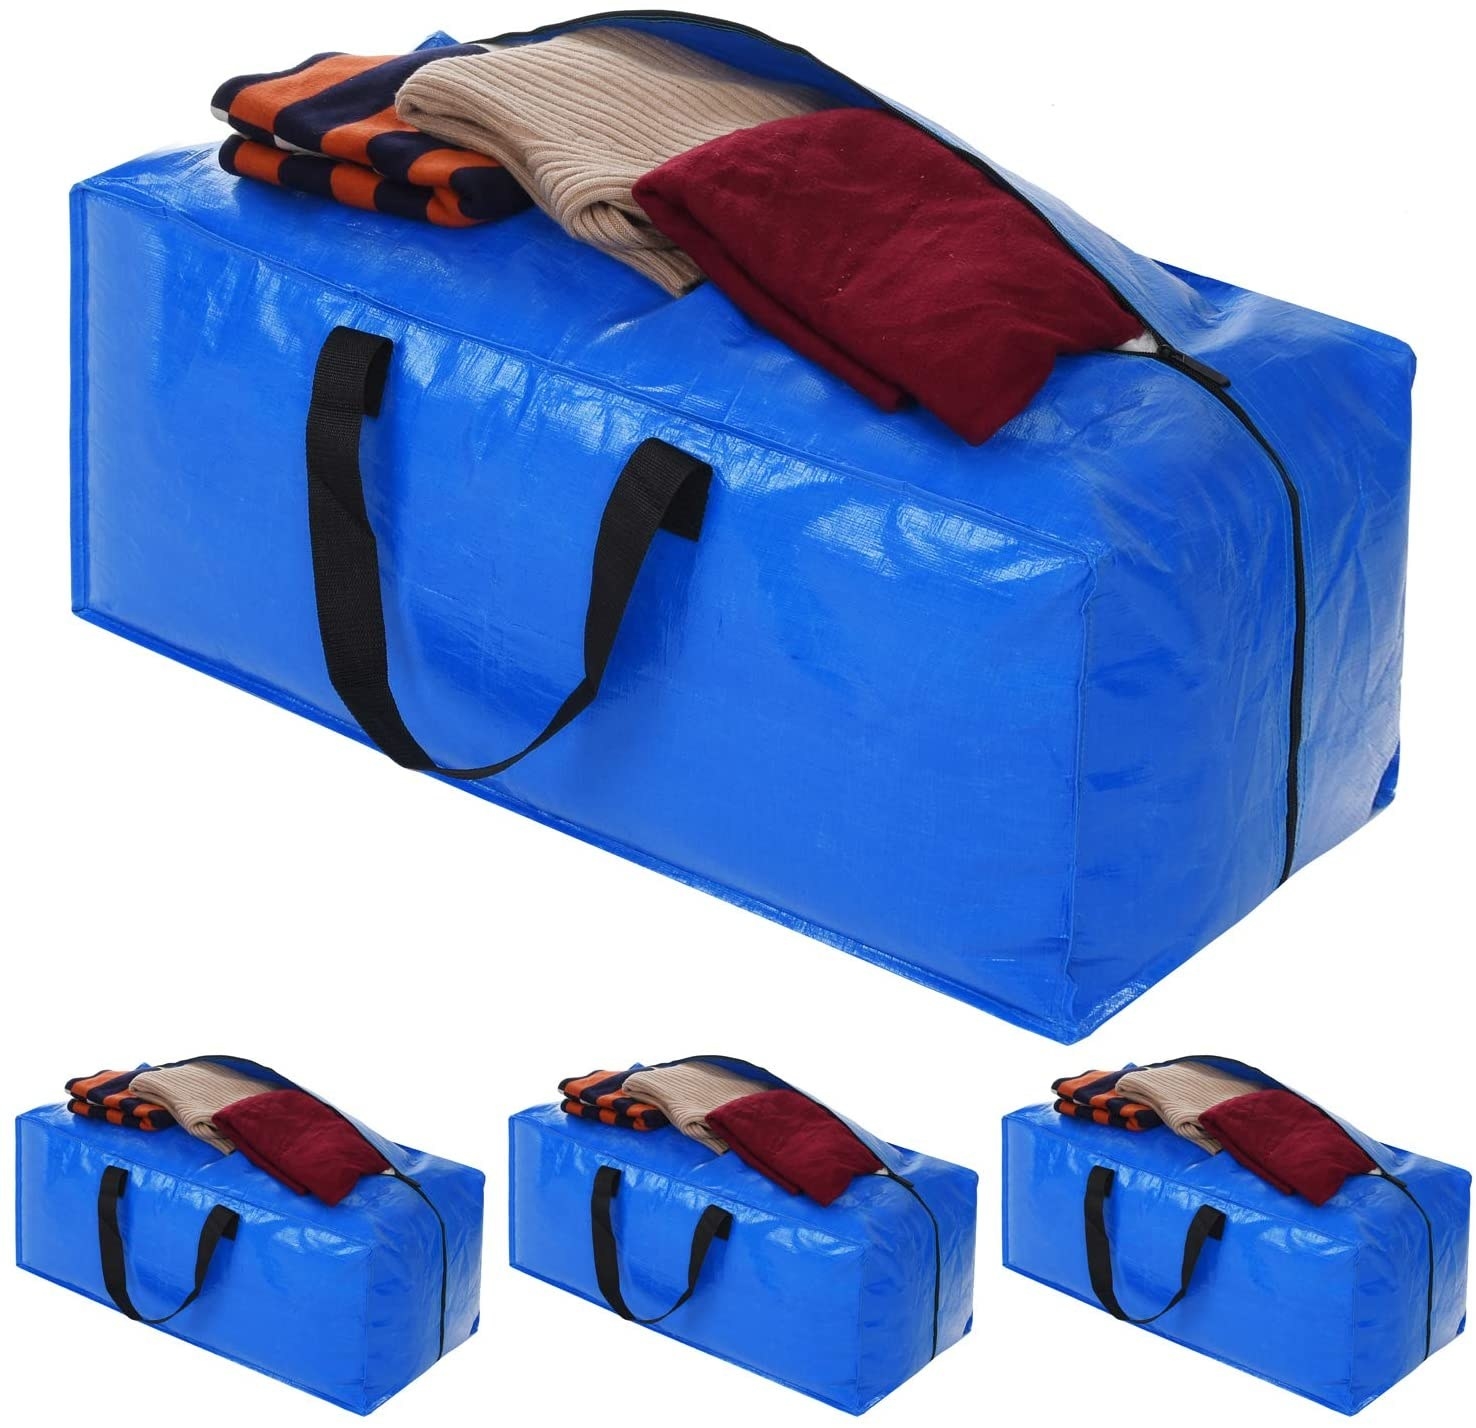 4 images of extra large blue plastic duffle bags with handles and with zipper open holding clothing items.